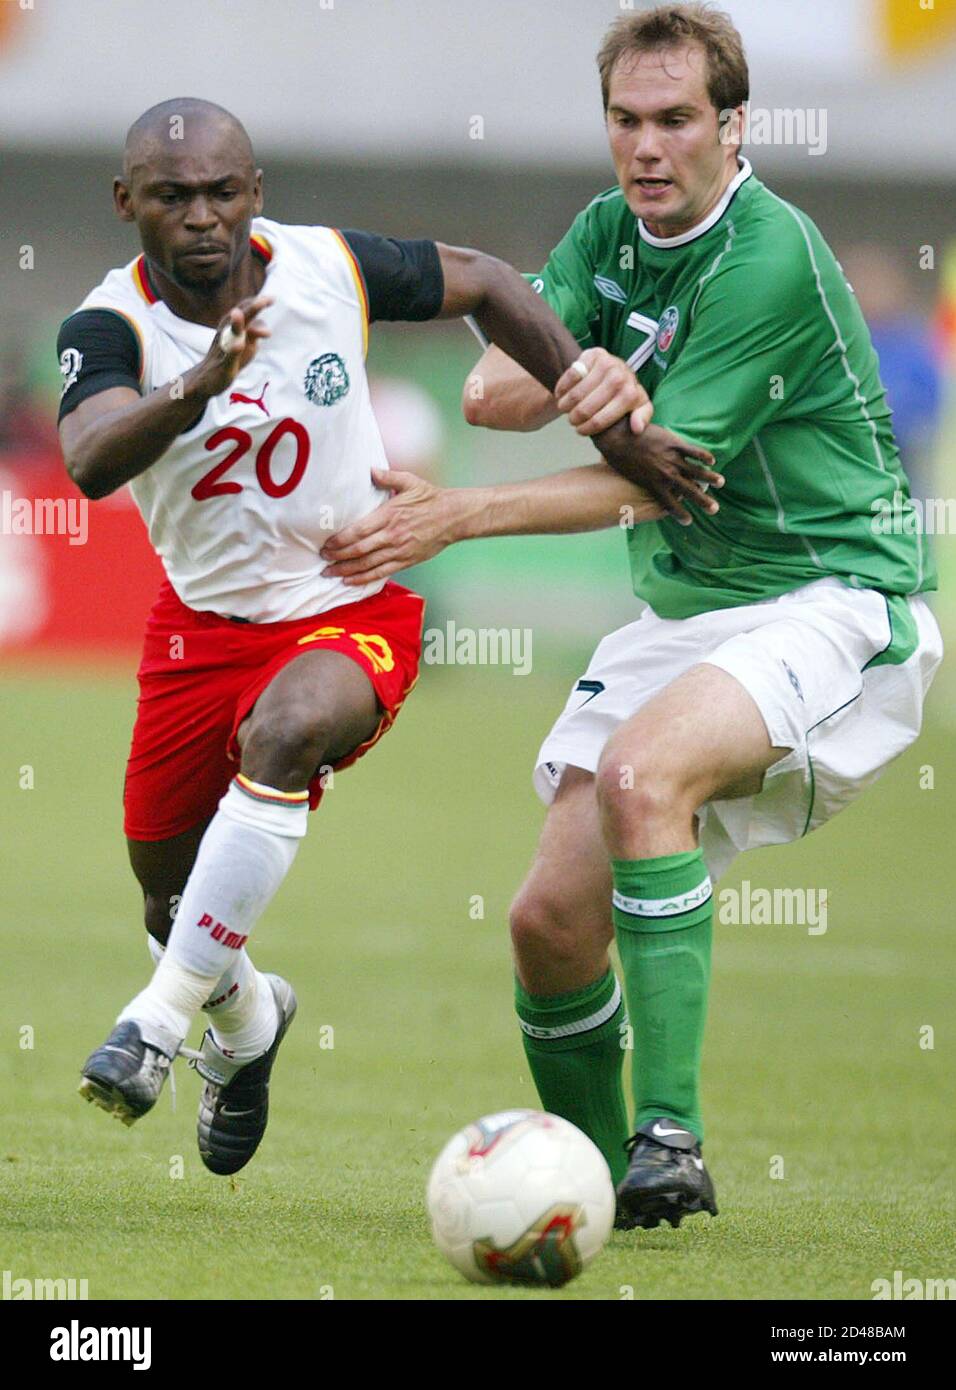 Ireland's Jason McAteer (R) tries to stop Cameroon's Salomon Olembe during  their Group E match at the World Cup Finals in Niigata, June 1, 2002.  REUTERS/Kieran Doherty CVI/JP Stock Photo - Alamy